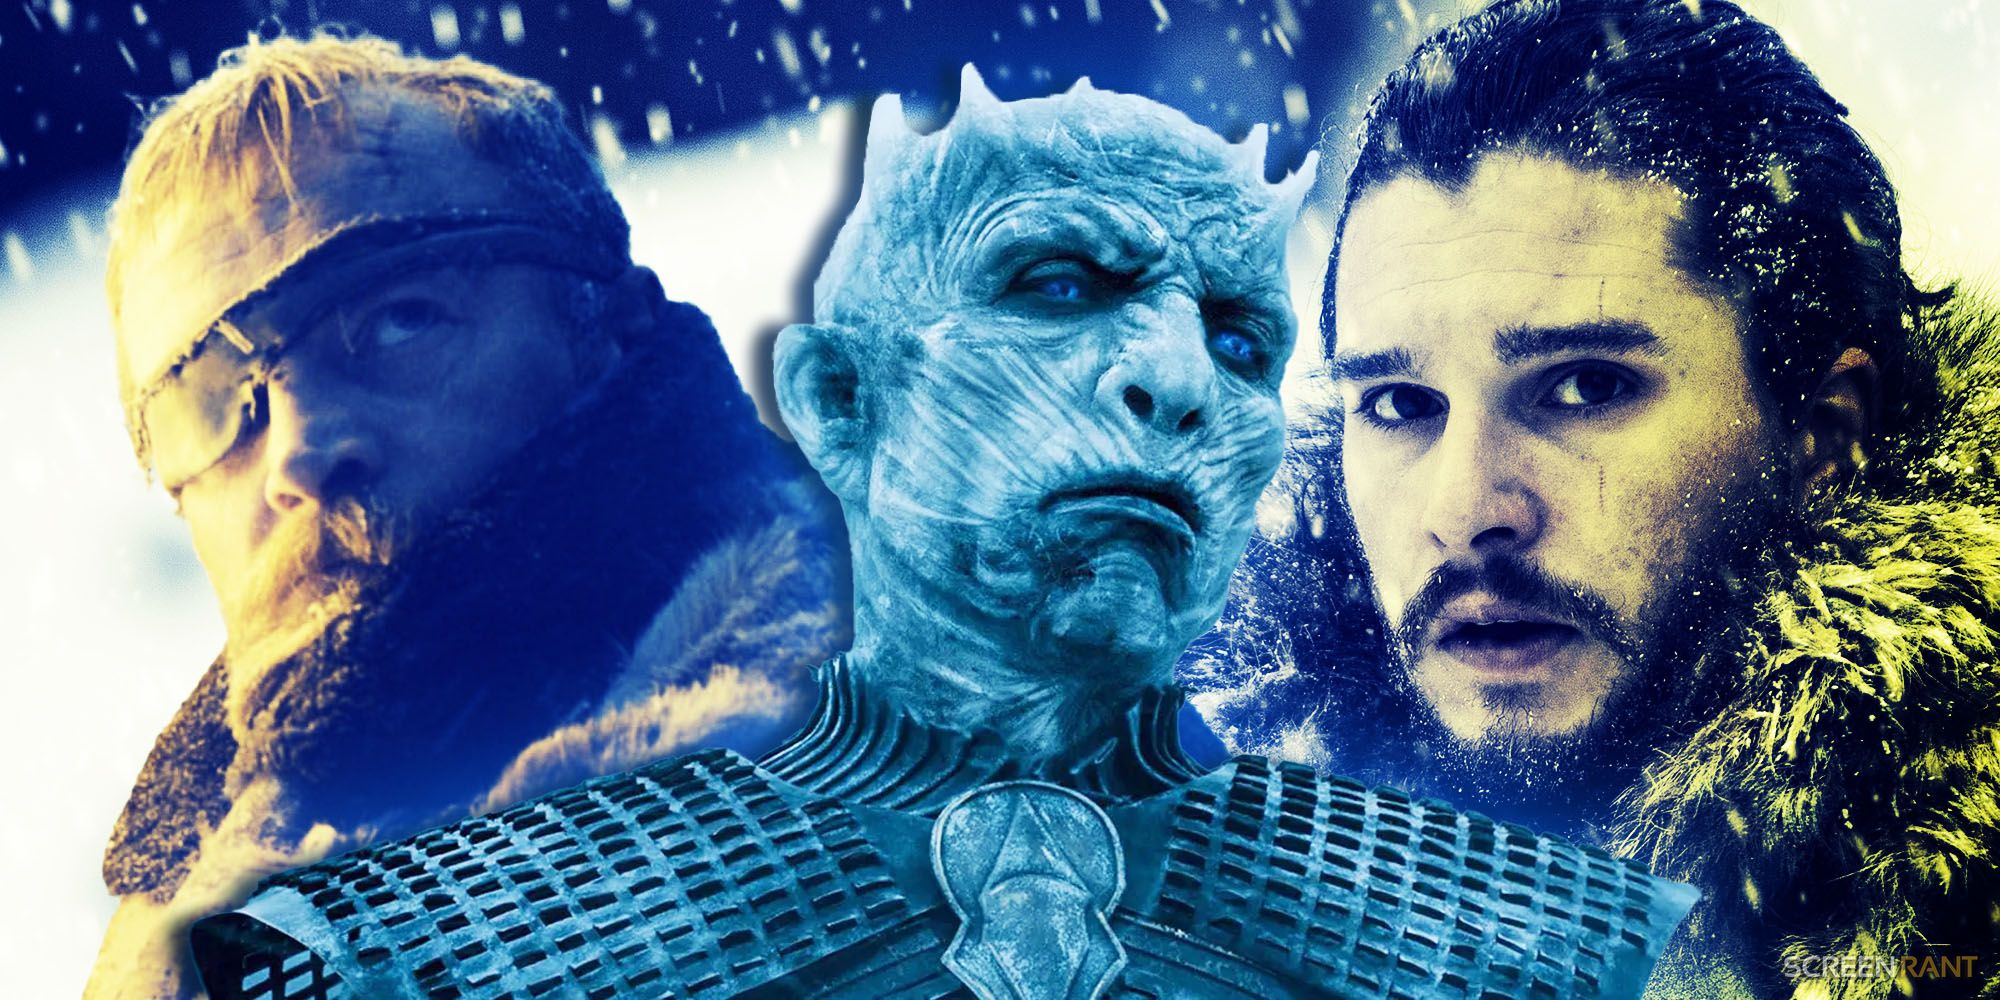 Night King, Beric, and Jon Snow in Game of Thrones